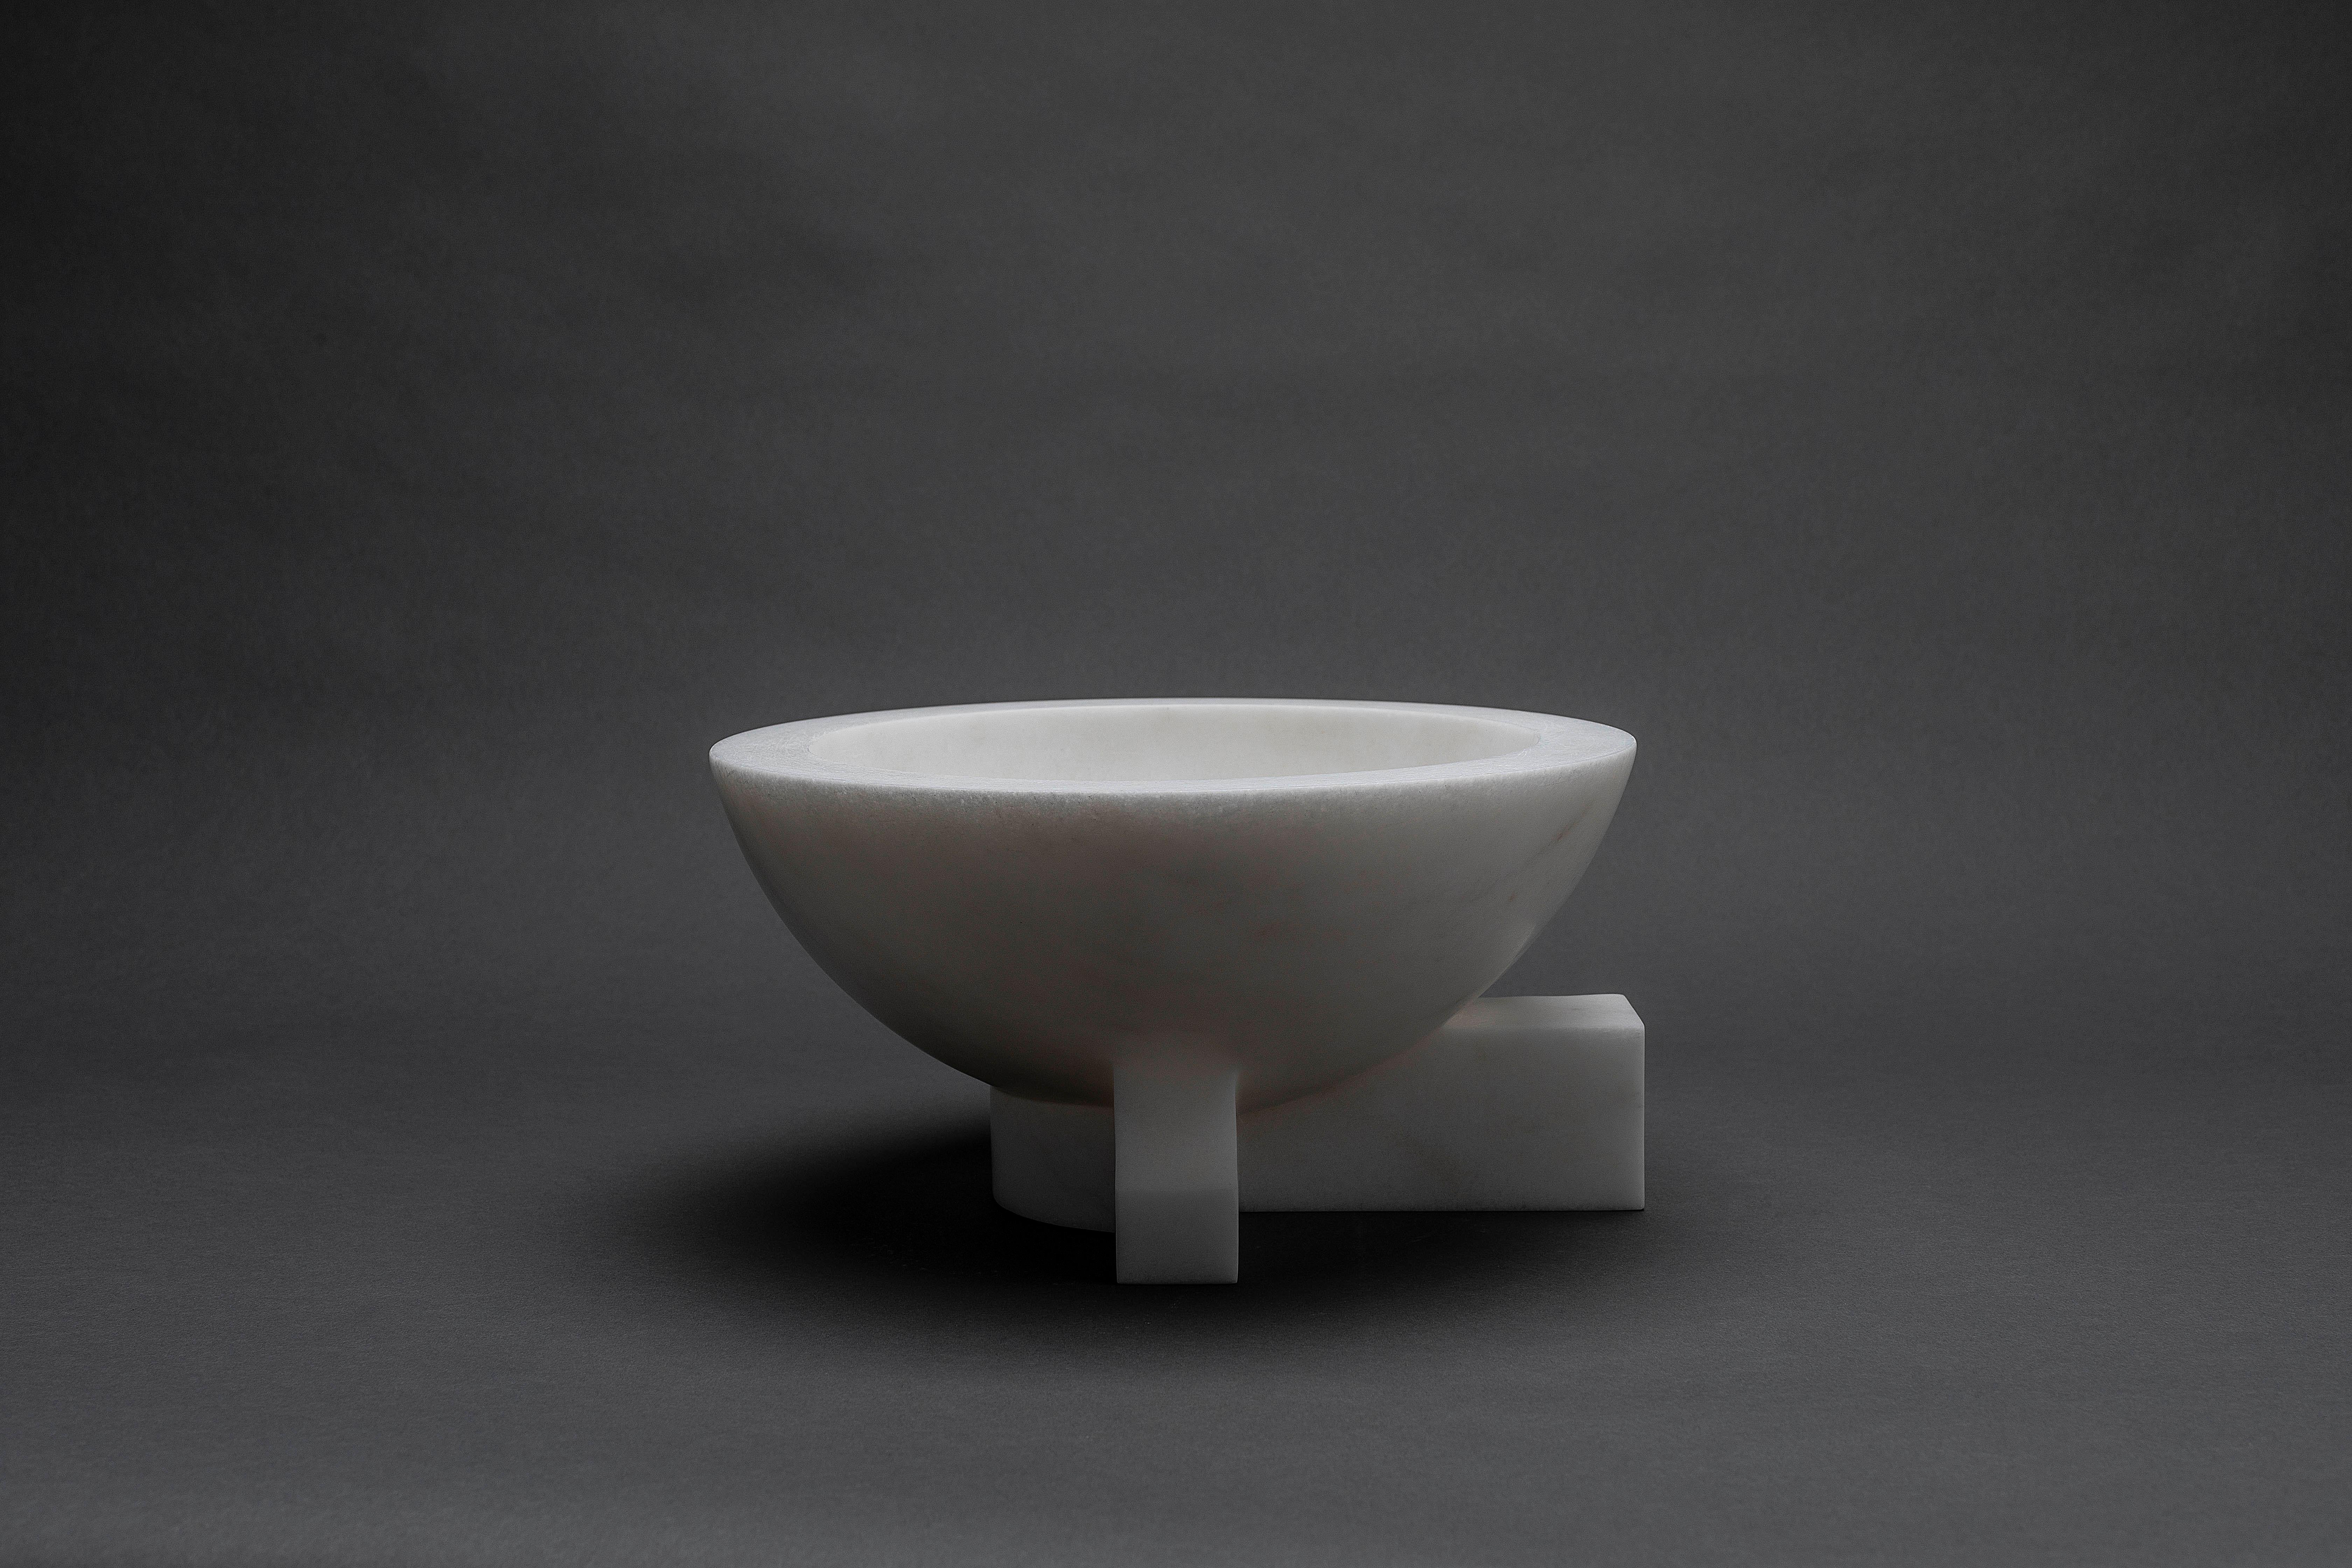 Tazón Alto Galeana bowl by Jorge Diego Etienne
Limited Edition of 10 + 1 AP
Dimensions: D 25 x W 25 x H 12.5 cm
Material: alabaster

Galeana is a collection of 6 objects designed by Jorge Diego Etienne and sculpted in alabaster by the Master